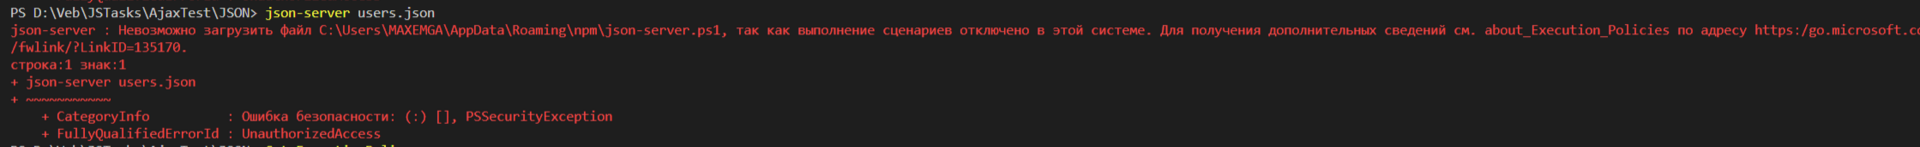 OBJECTNOTFOUND: (venv\scripts\activate.ps1:String) [], COMMANDNOTFOUNDEXCEPTION. File:///c:/users/asusk52d/pictures. Categoryinfo ошибка безопасности